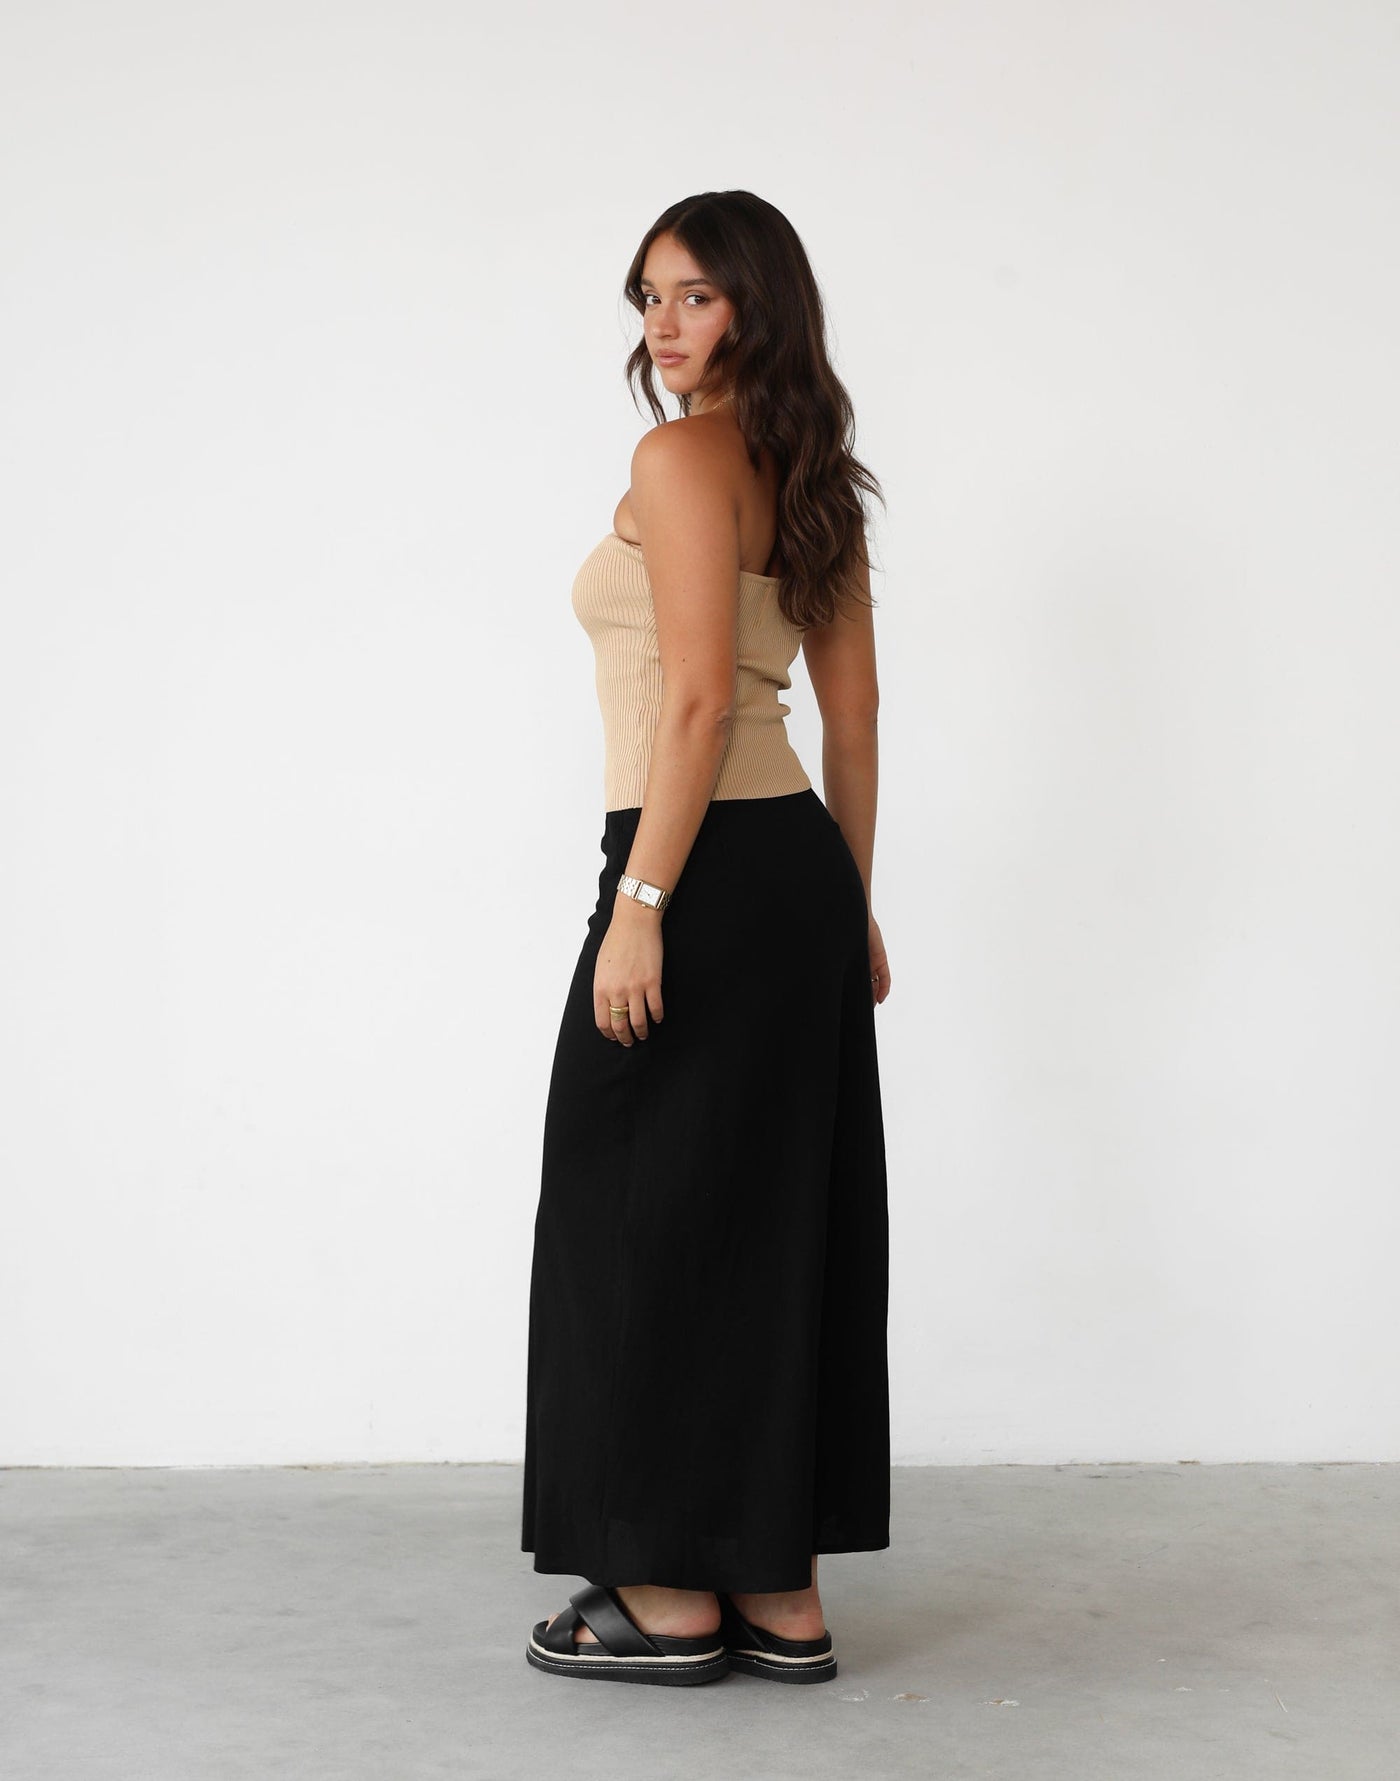 Shayna Strapless Top (Beige) | Ribbed Strapless Top - Women's Top - Charcoal Clothing